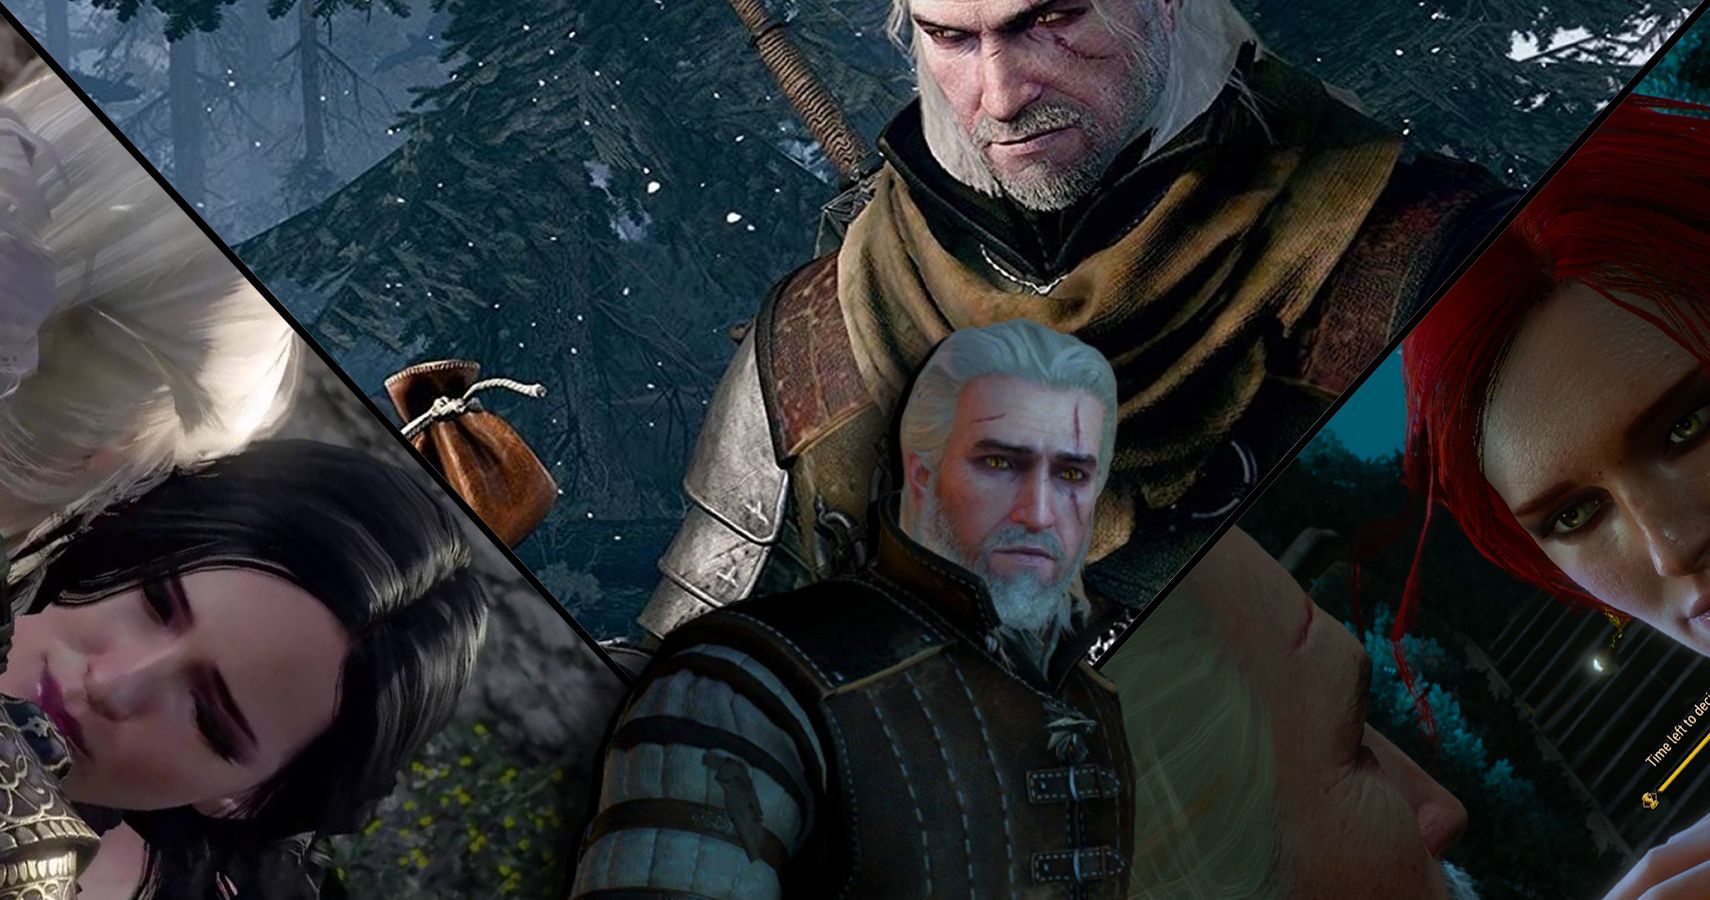 Witcher 1 mods: The best mods for surviving the first Witcher